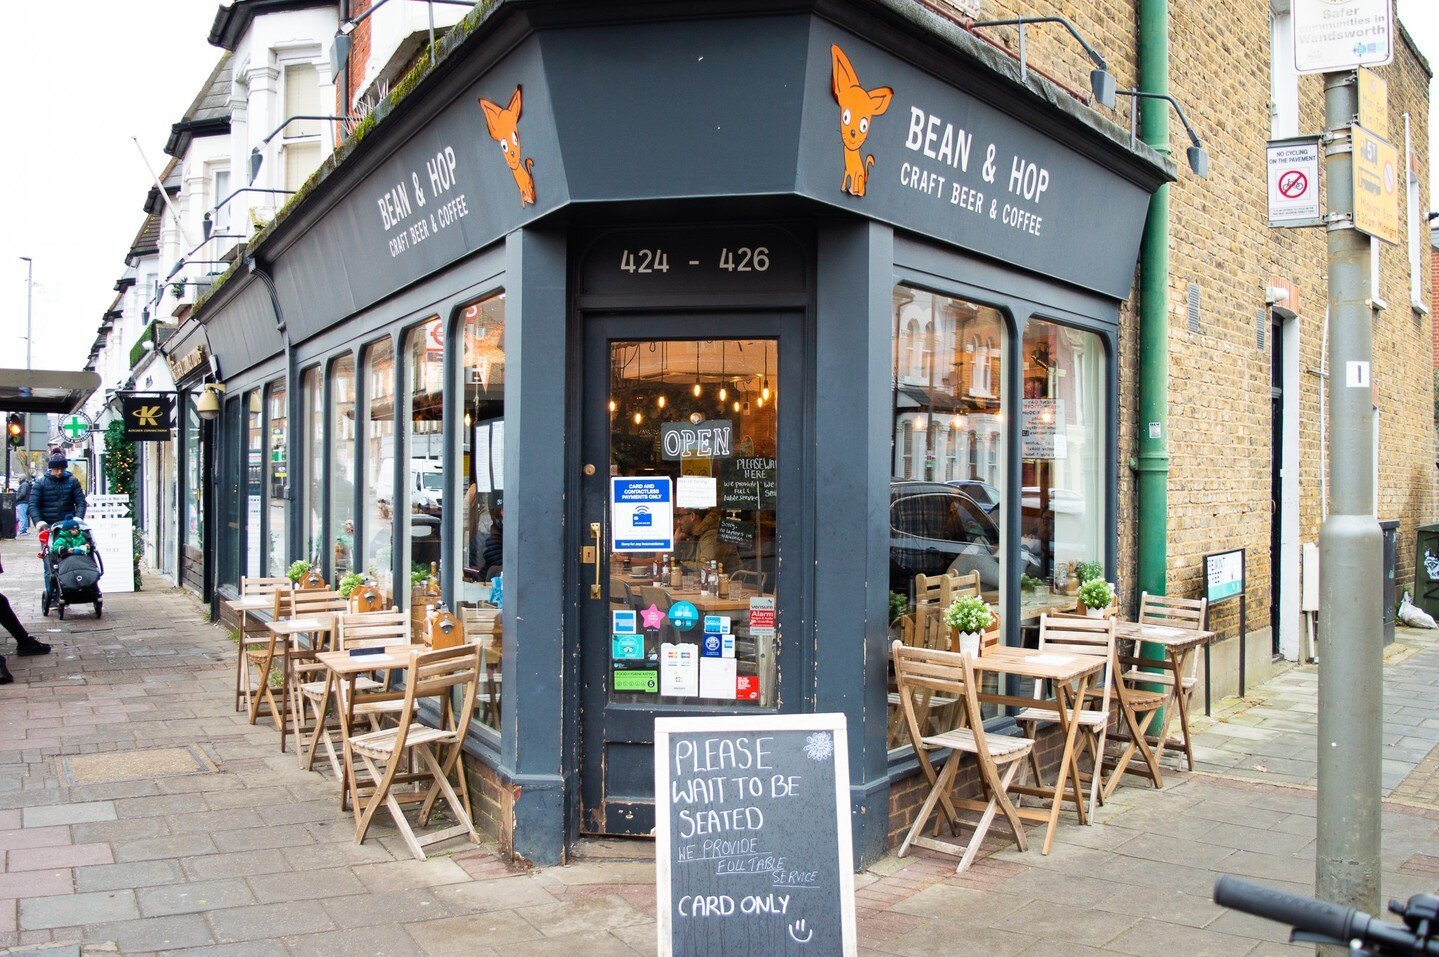 Need a place to wind down and relax? 🧡 Visit us to enjoy our cosy venue and treat yourself to a delicious lunch and a hot cup of coffee! ☕ We can't wait to welcome you! ✨ Find us on Garratt Lane, Earlsfield 📍